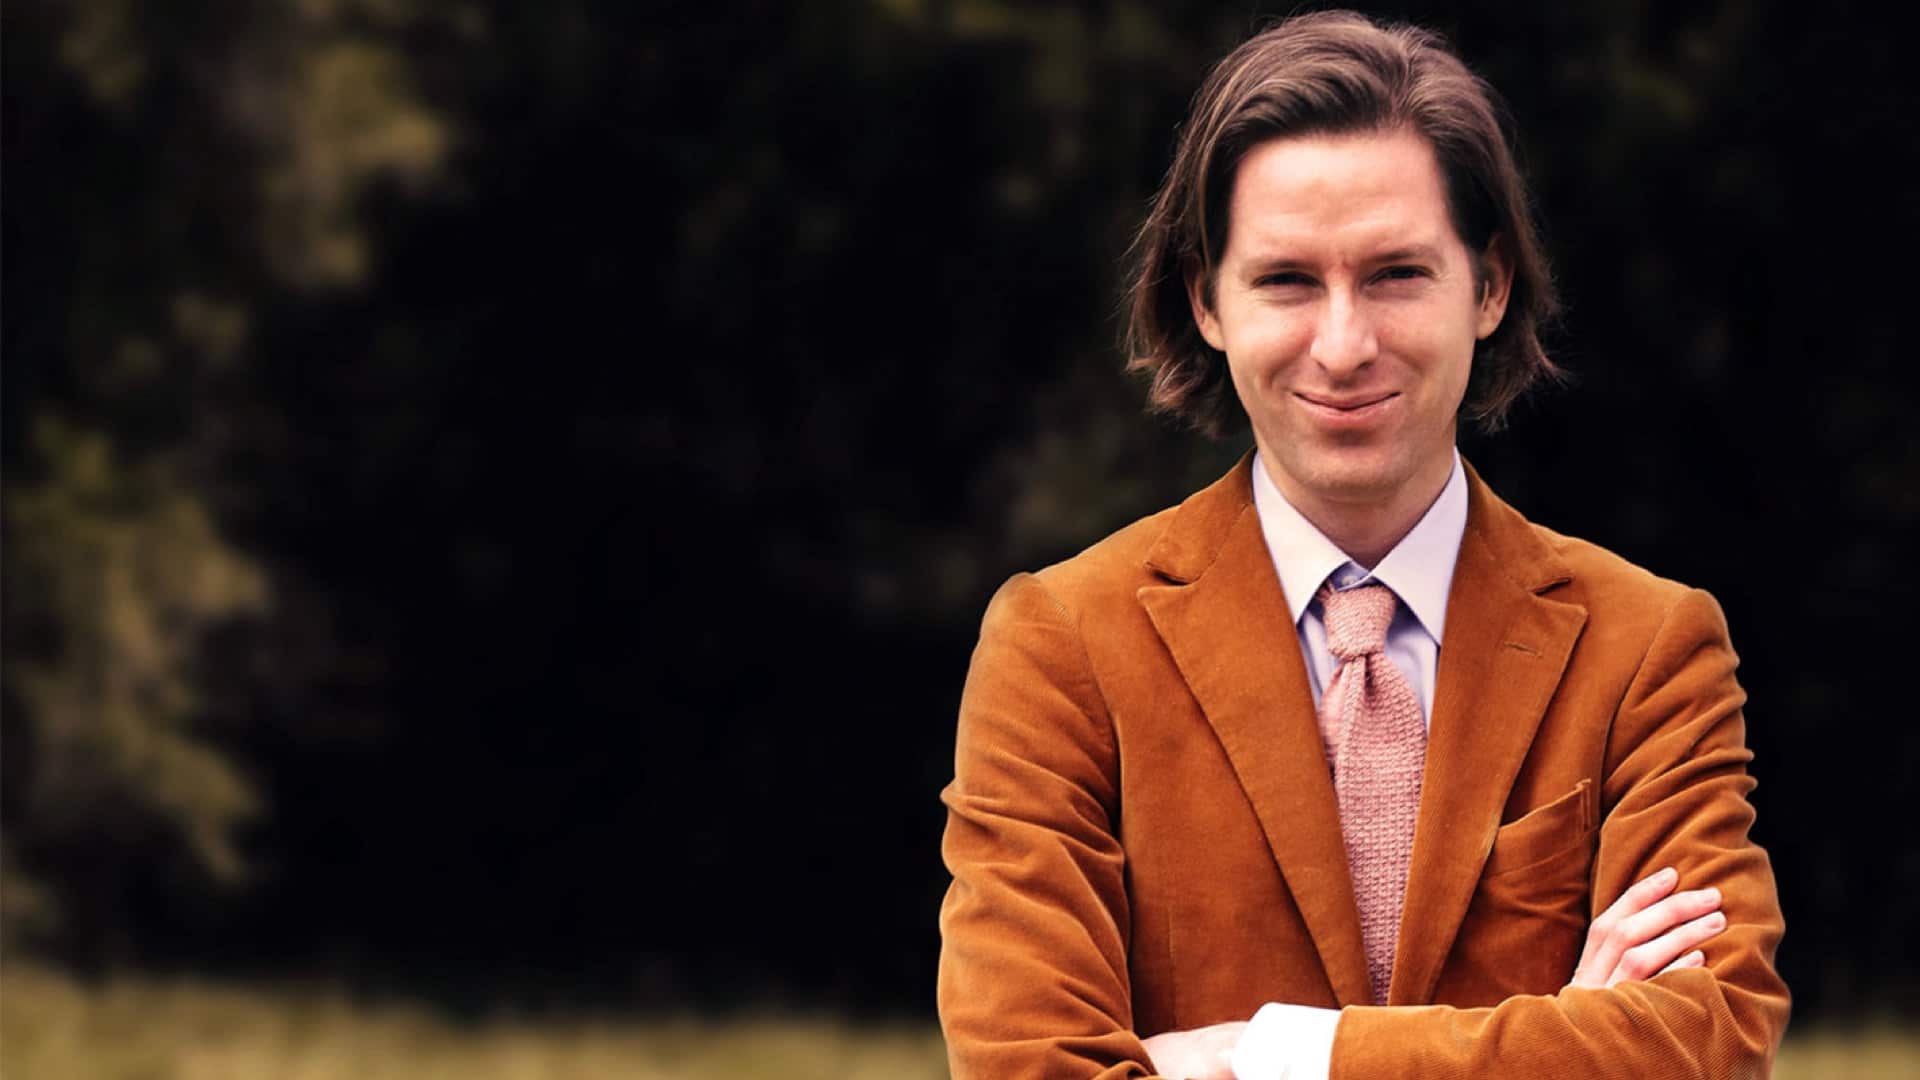 wes anderson prossimo film